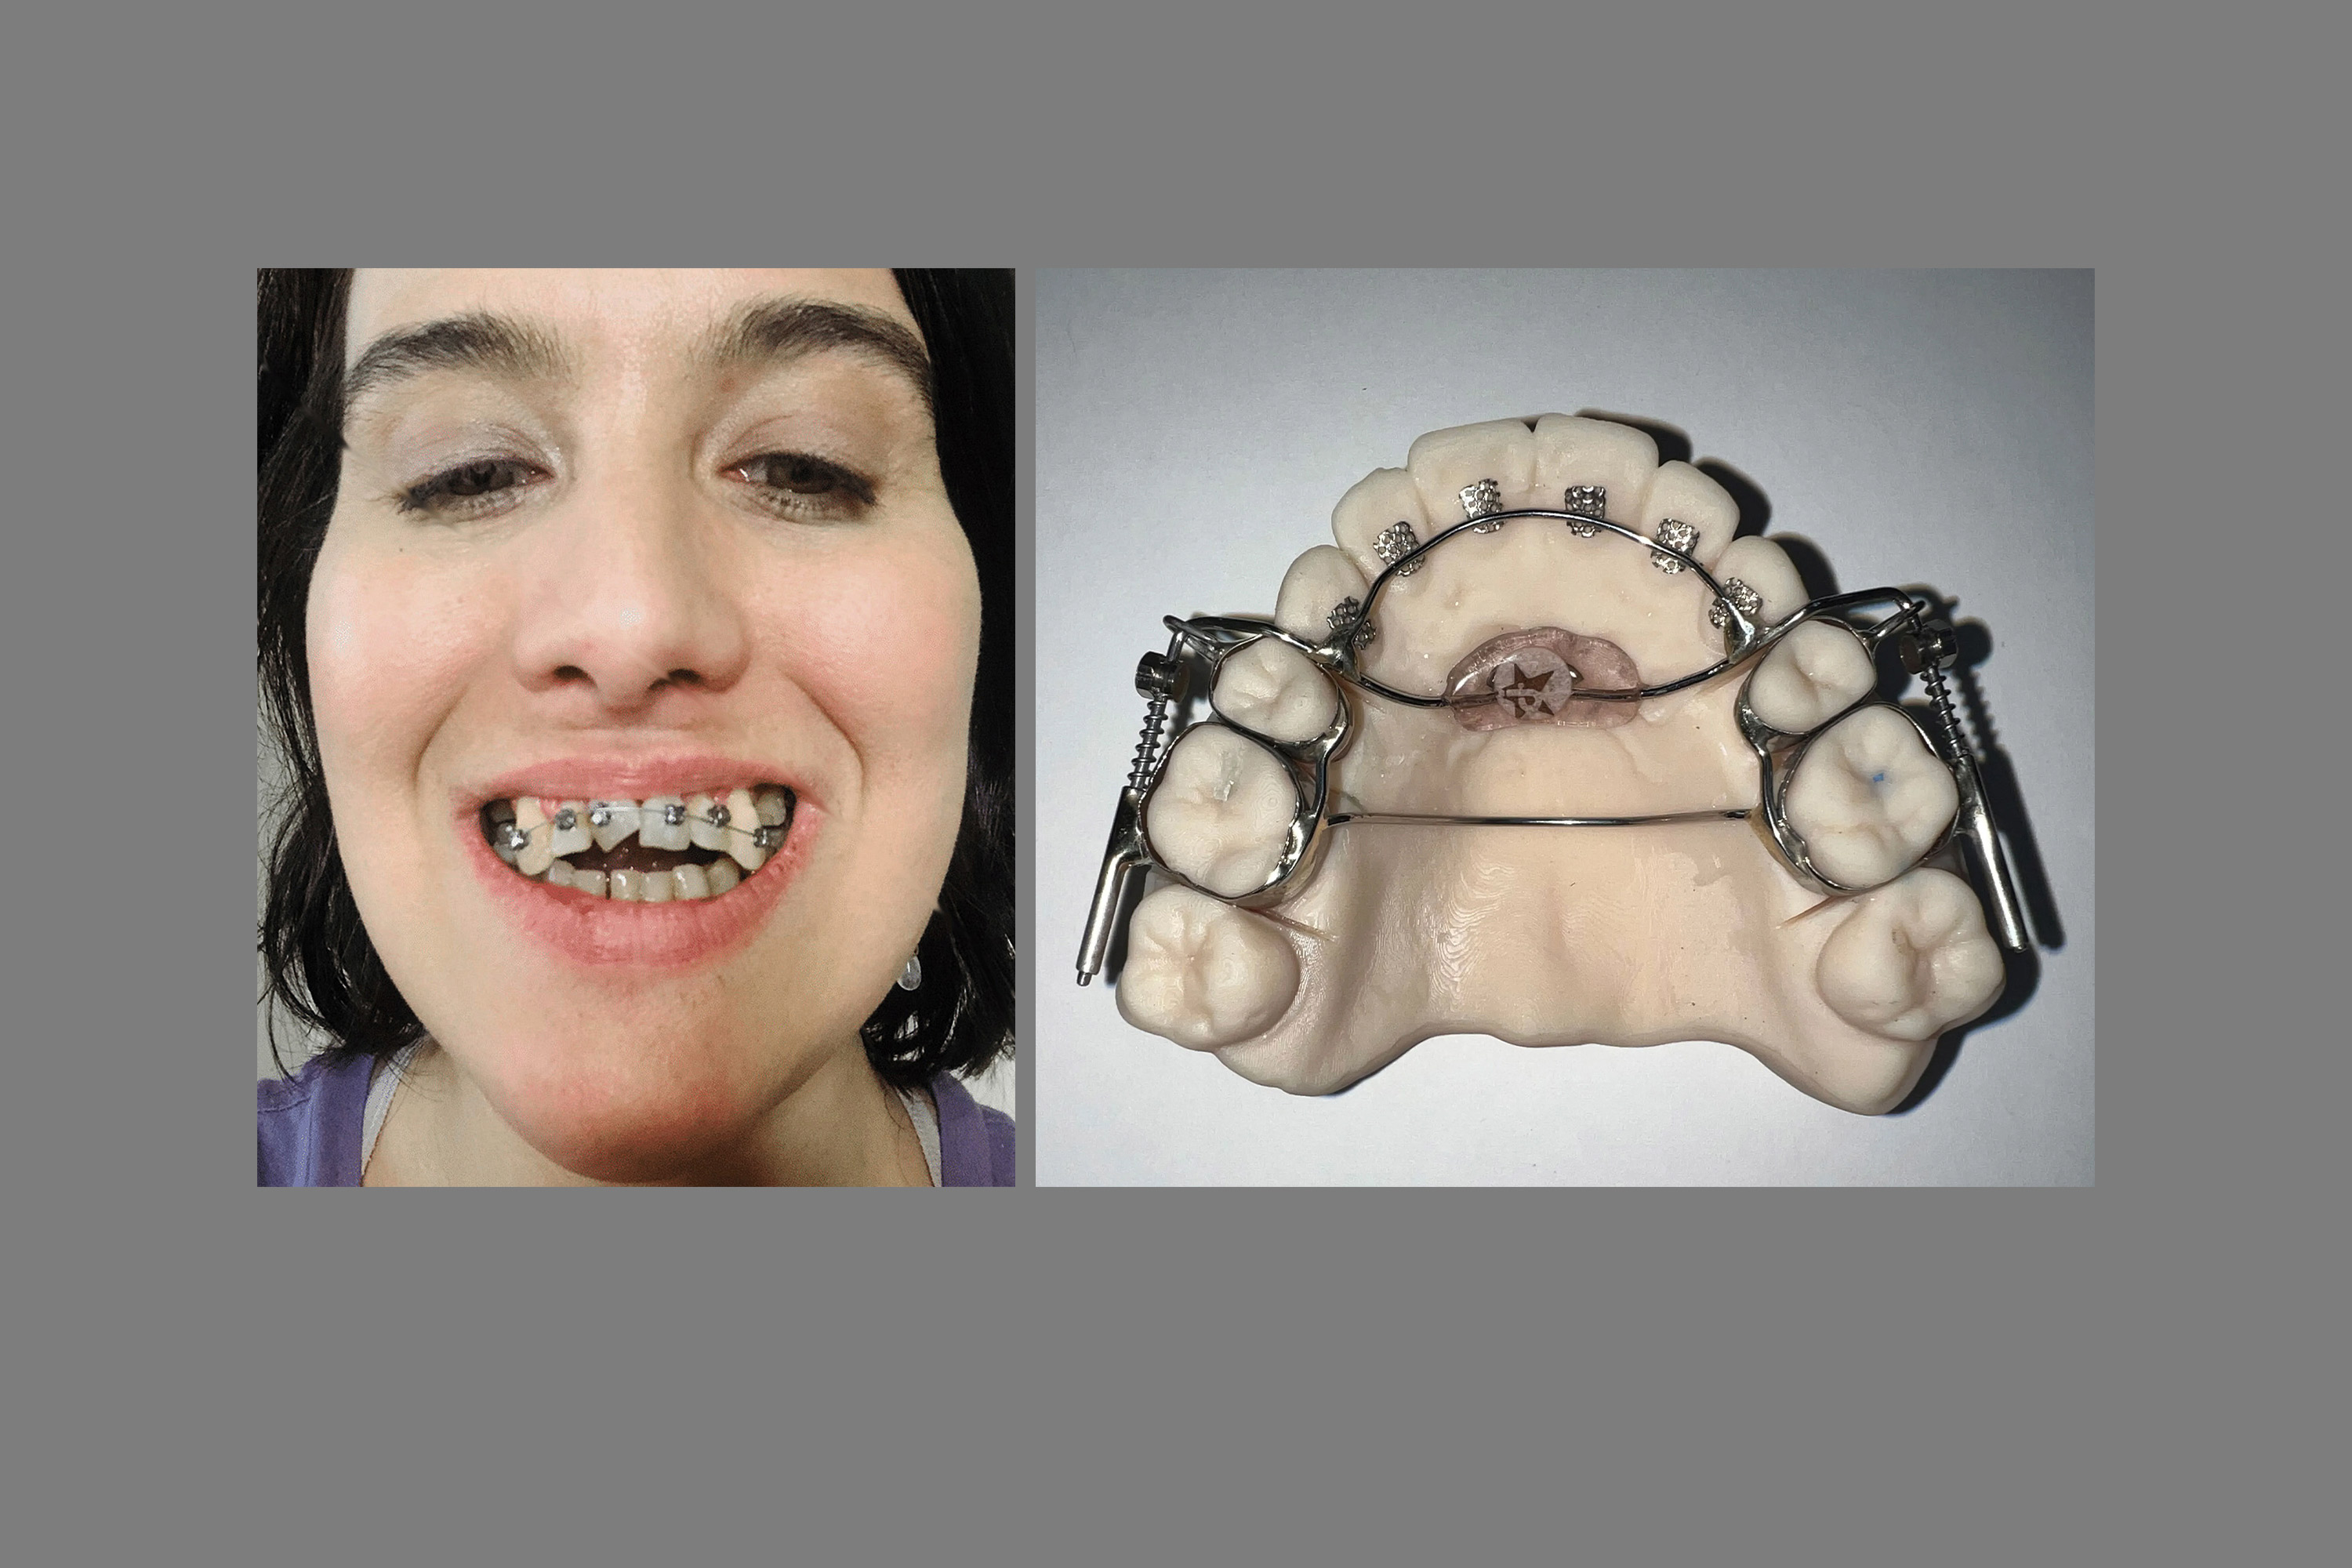 FDA Said It Never Inspected Dental Lab That Made Controversial AGGA Device